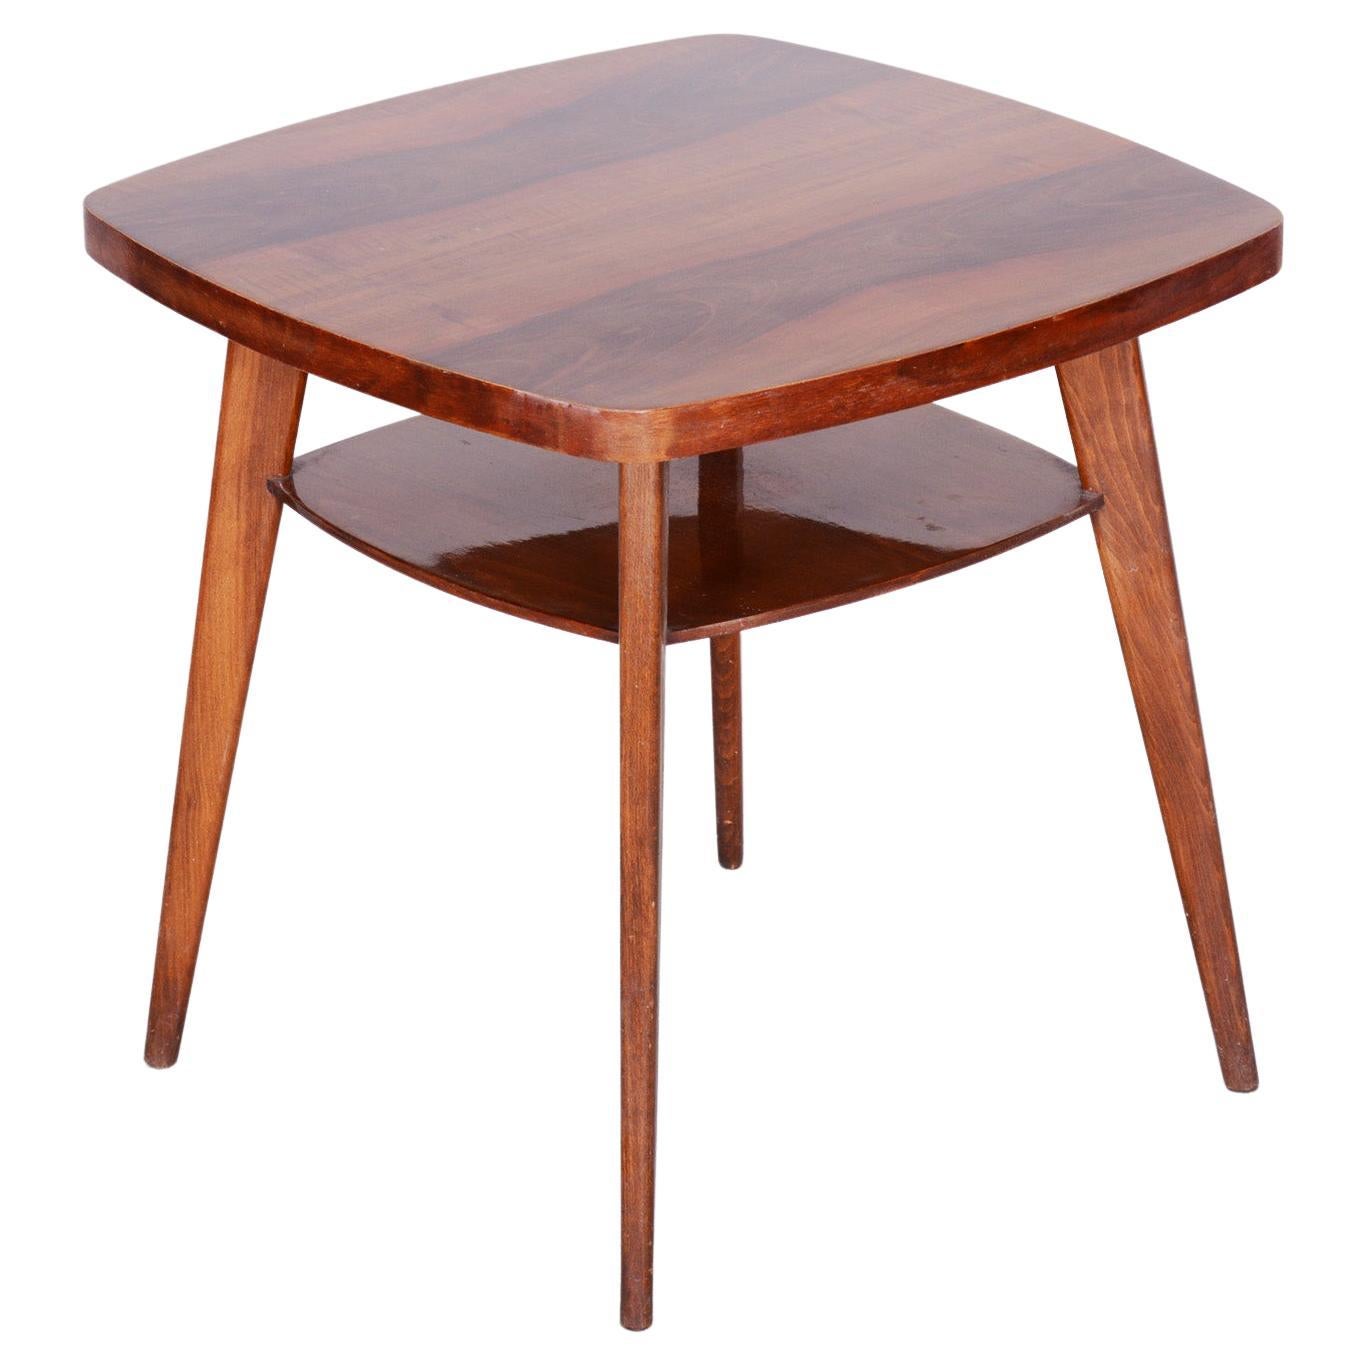 Walnut Table, Czech Midcentury, Preserved Original Condition, 1950s For Sale